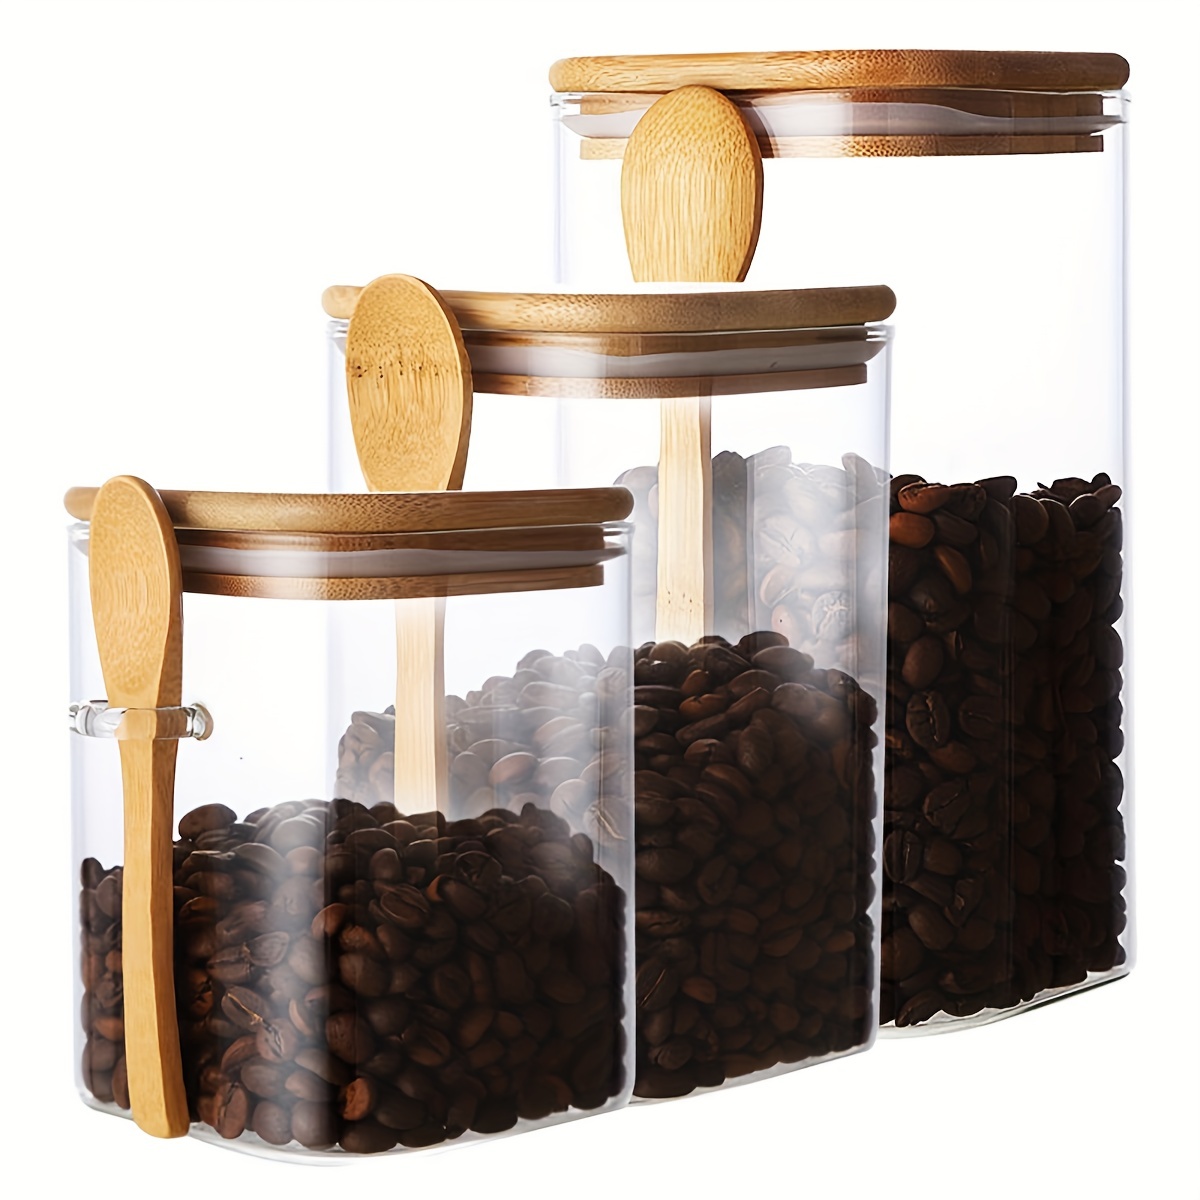 

3pcs Set Airtight Glass Jars With Wood Lids And Wood Spoons, Glass Canisters, For Coffee Beans, Tea, Flour, Sugar, Nuts, Candy, Bath Salts & More, Home Kitchen Supplies